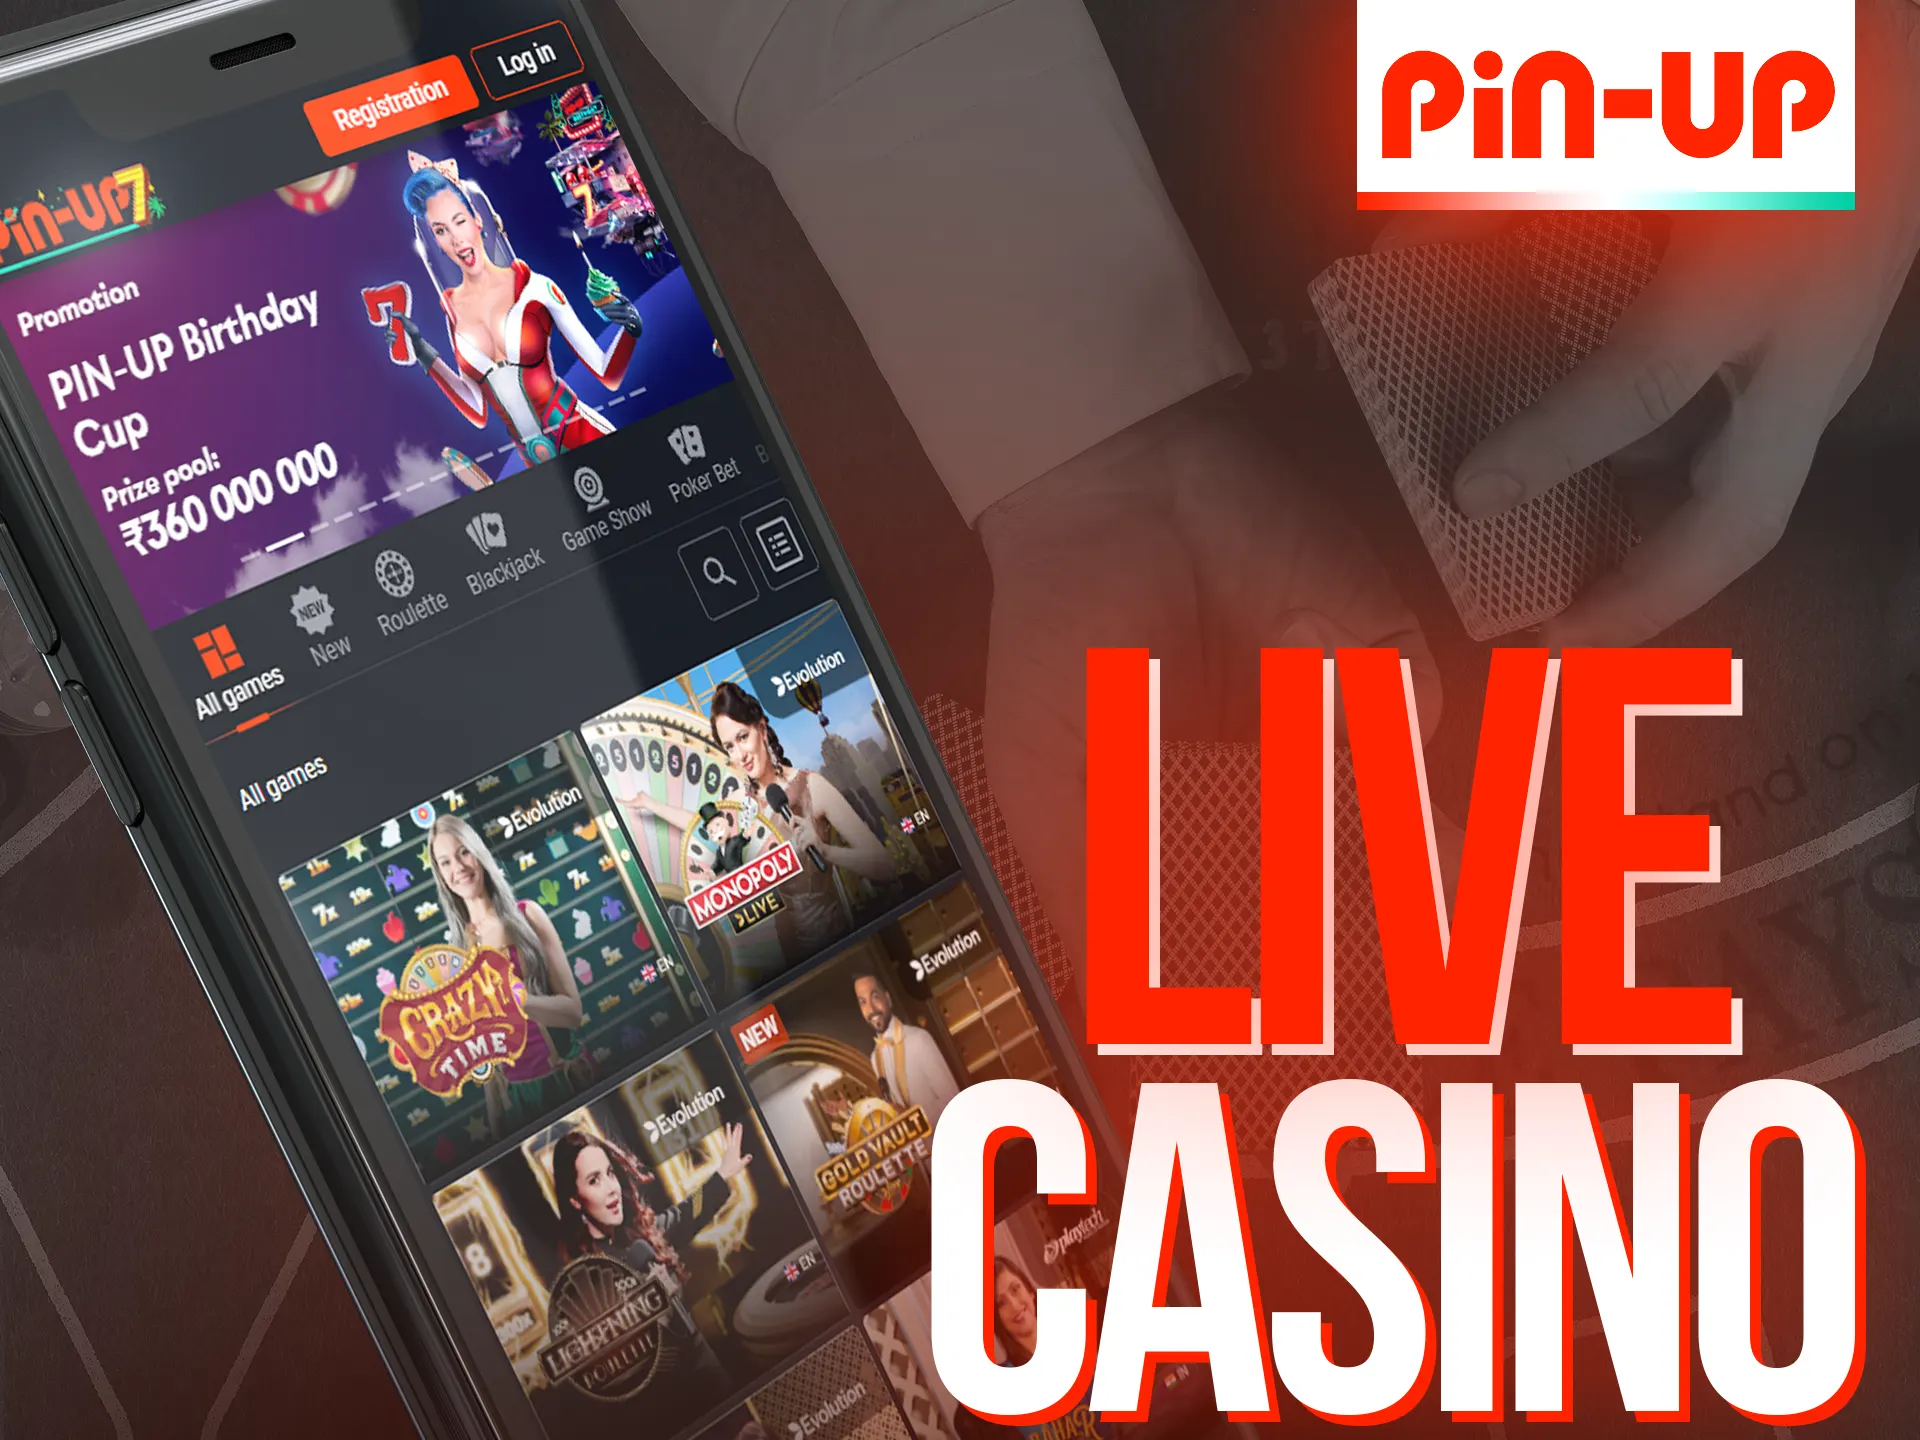 Play with real dealers online in the live casino section.